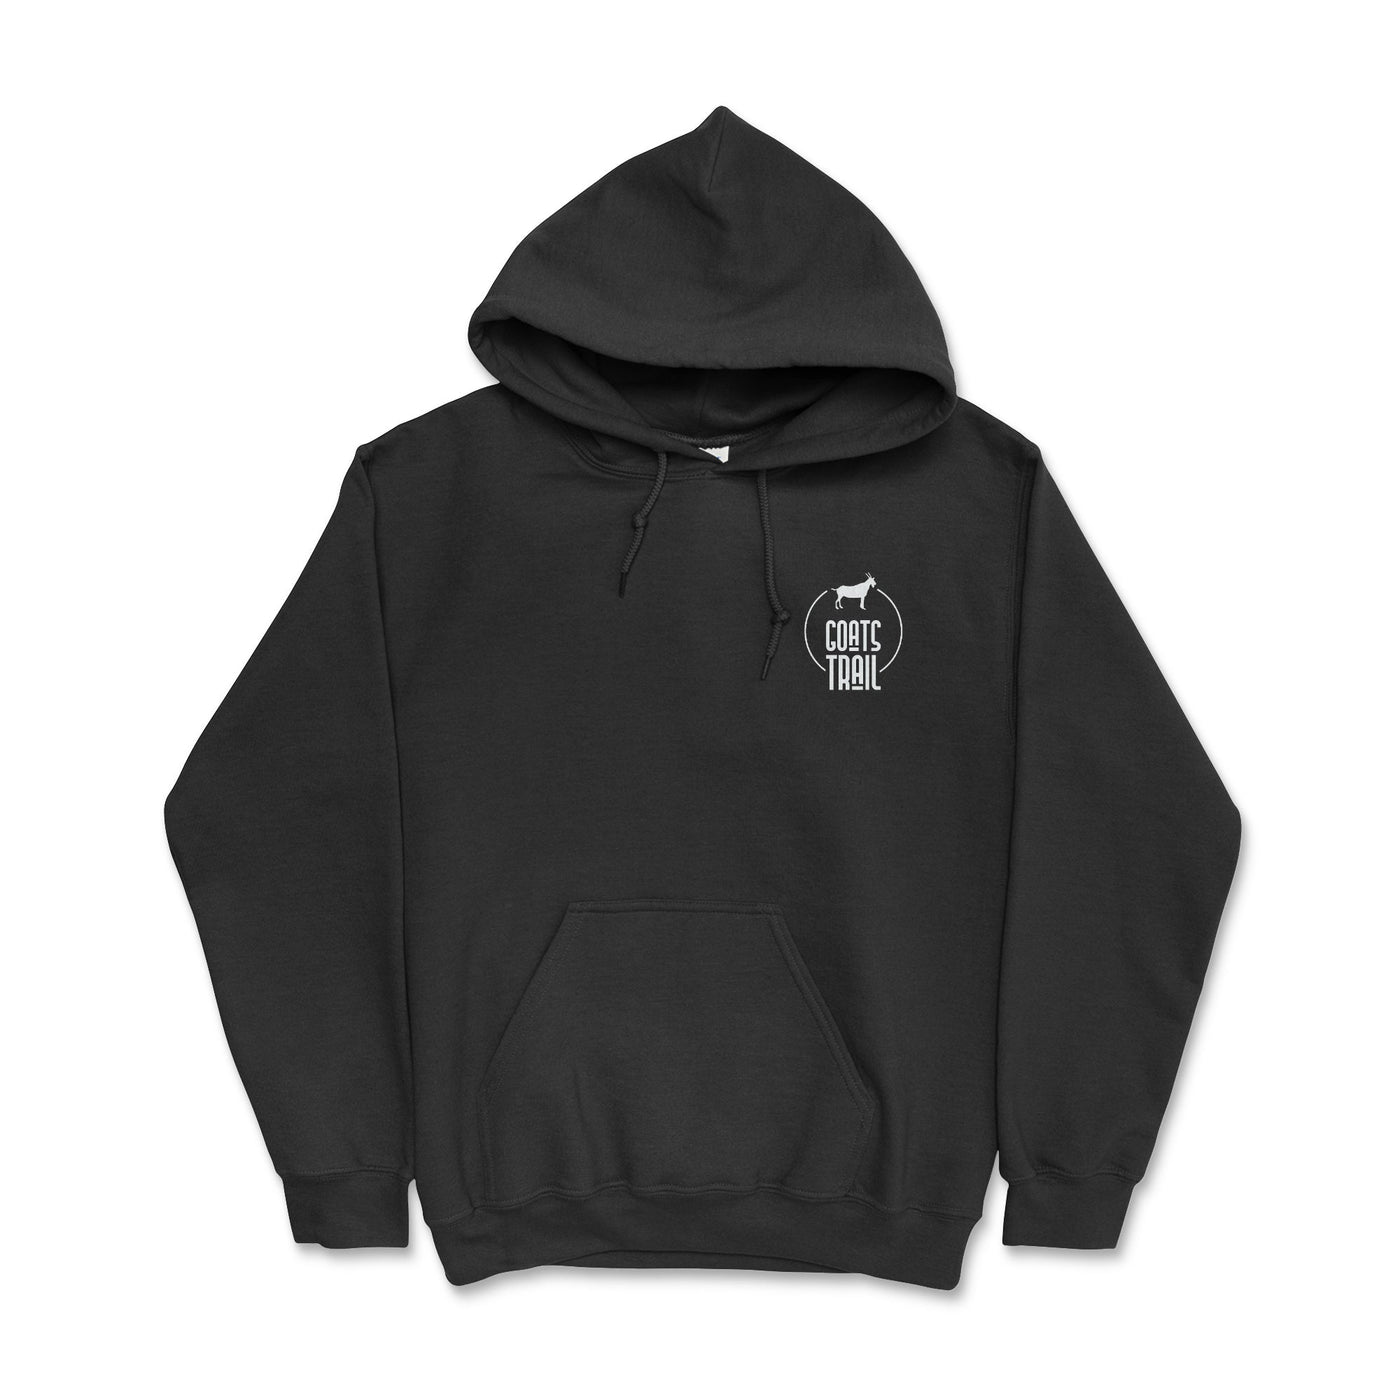 Lifted Lifestyle Hoodie-Made for all Off-road Adventures - Goats Trail Off-Road Apparel Company